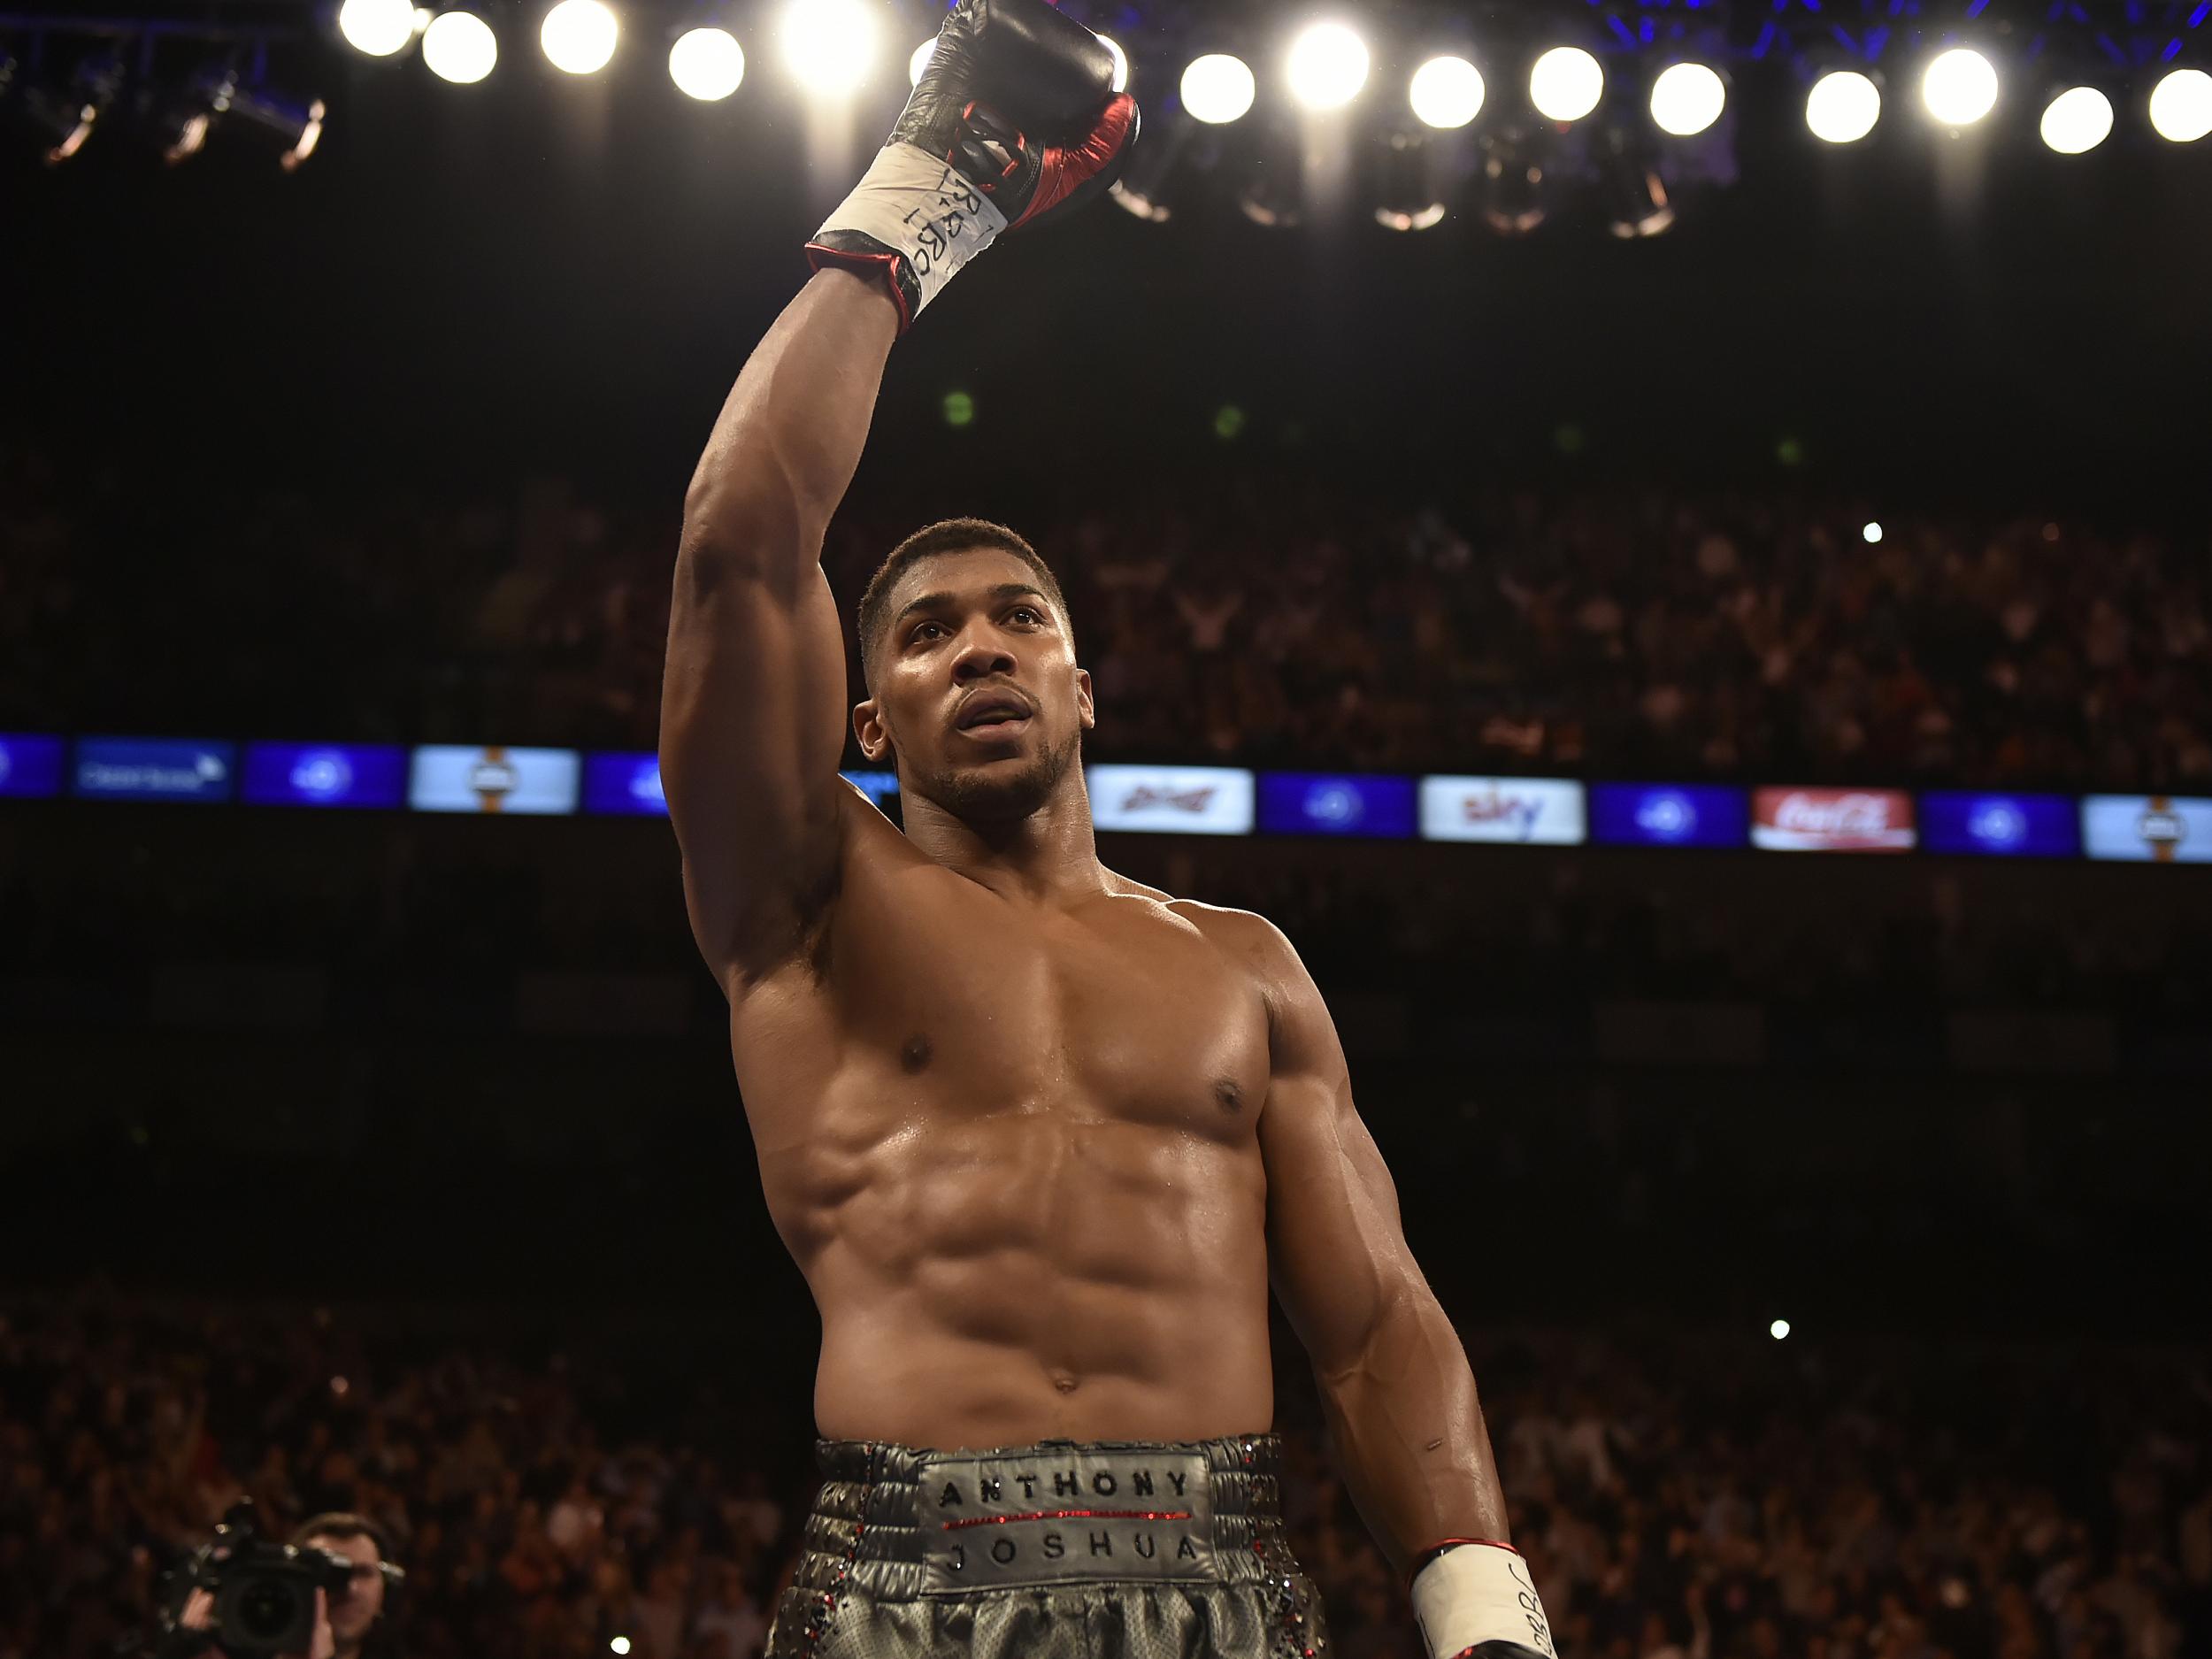 Joshua v Klitschko prize money: How much Anthony Joshua could earn with  heavyweight win | Boxing | Sport | Express.co.uk